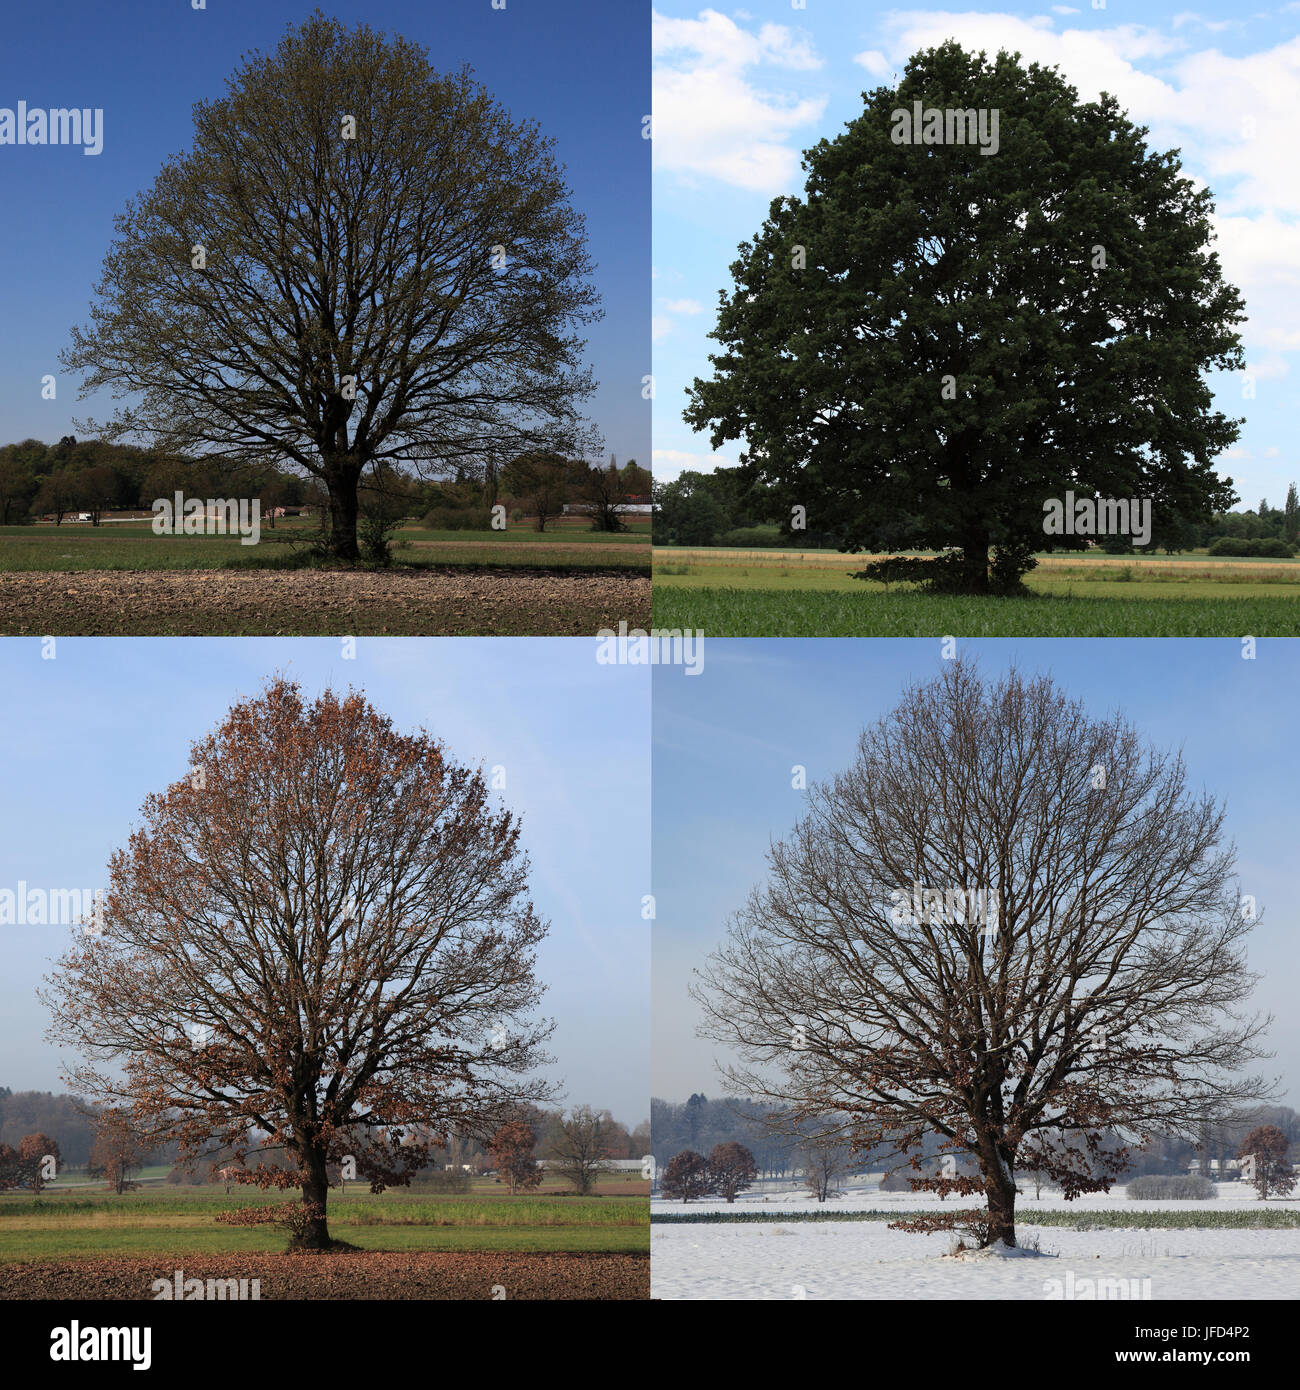 4 seasons composing of an oak tree in landscape, Bavaria, Germany, Europe. Photo by Willy Matheisl Stock Photo